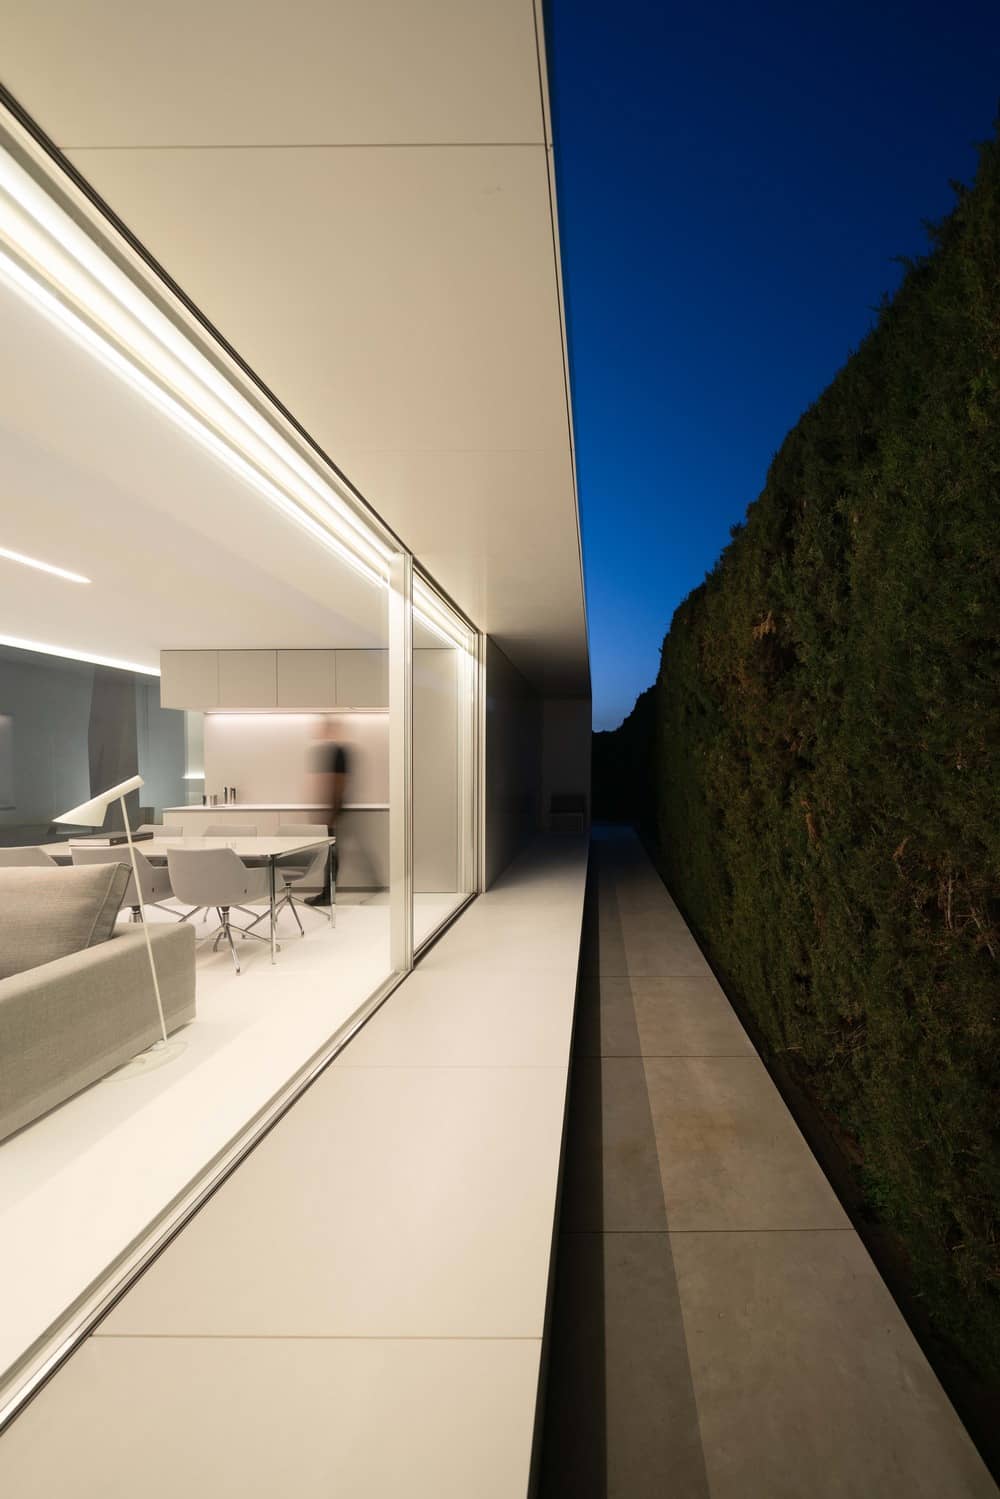 NIU Project by Fran Silvestre Arquitectos